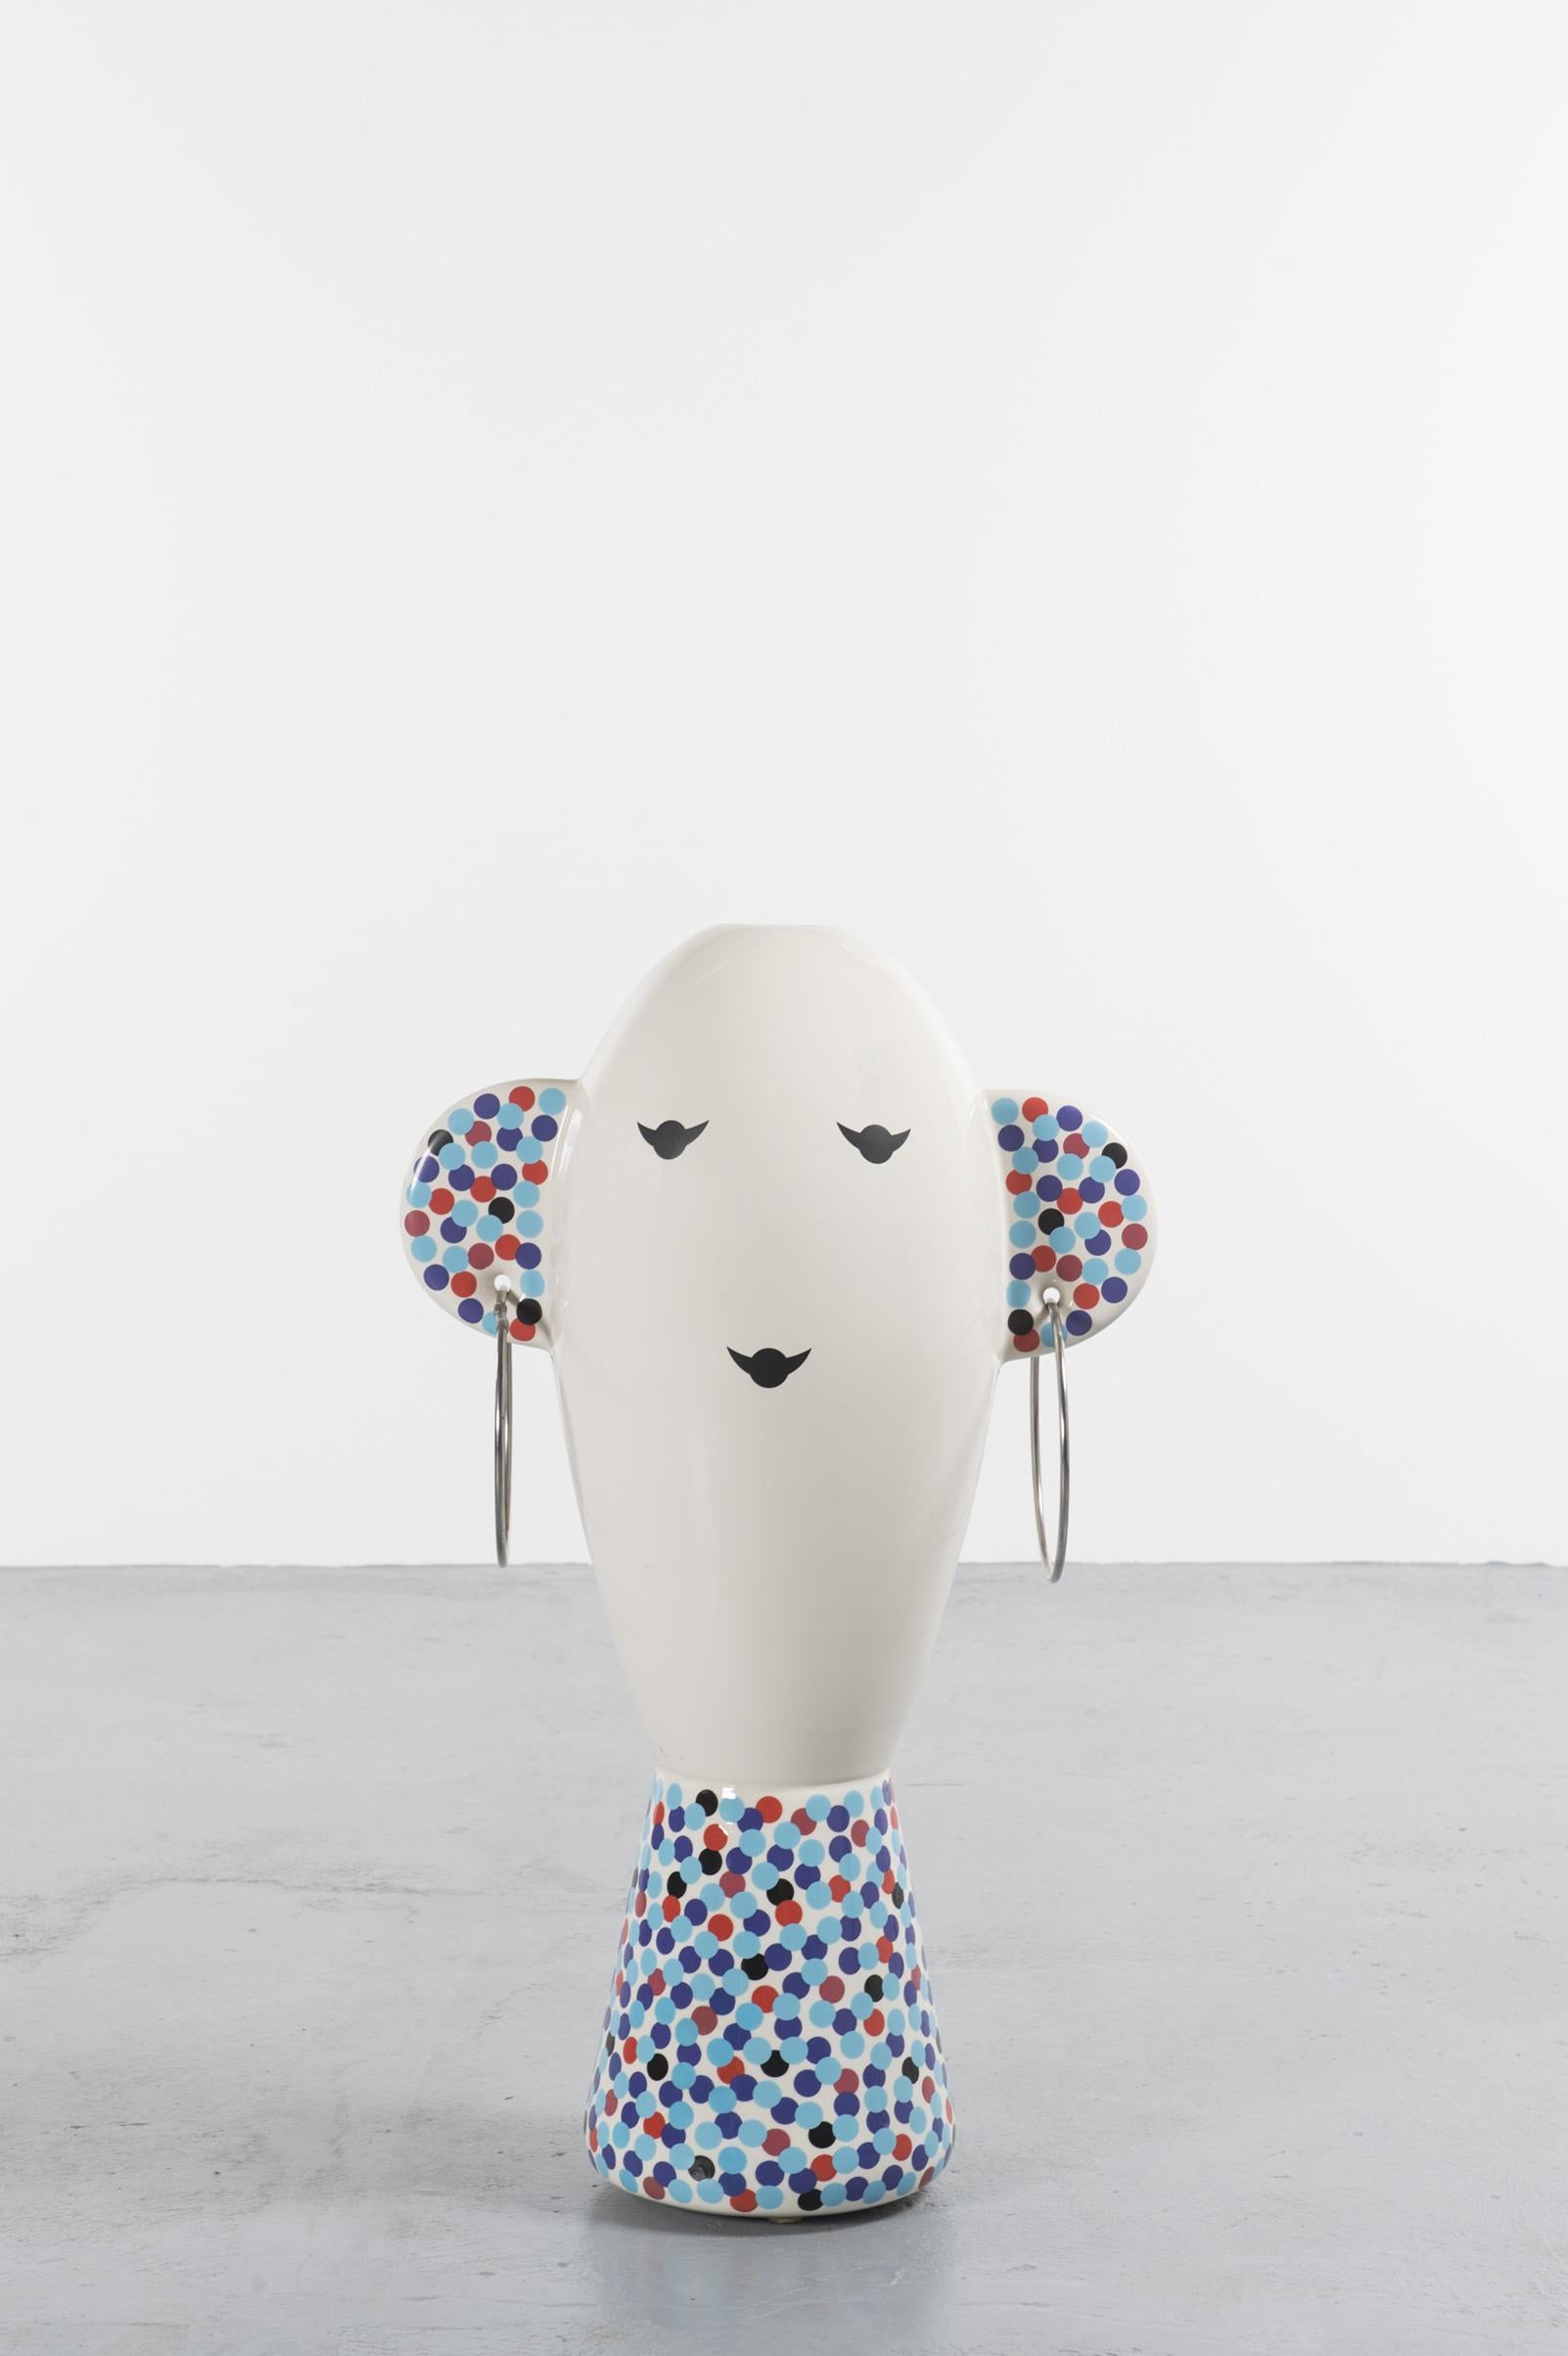 Vaso Viso TOTEM by Alessandro Mendini and Produced by Alessi, 2001, Italy

Polychrome enameled ceramic sculpture designed in 2001 by Alessandro Mendini and edited by Alessi, iconic Italian brand, in a limited edition of 99 pieces. This item is